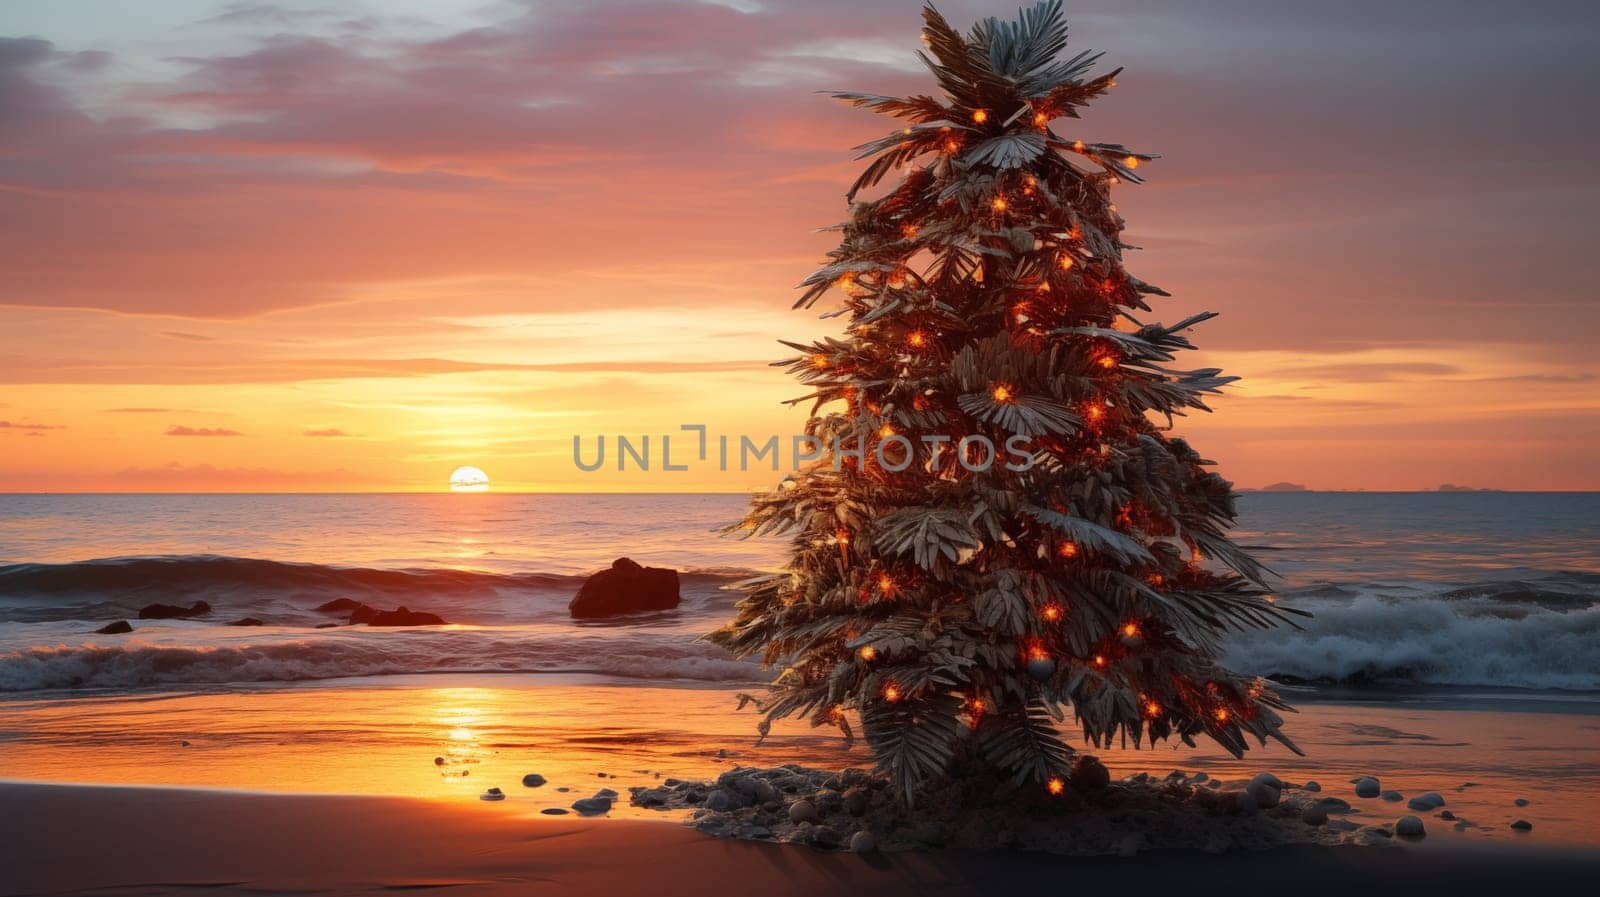 Christmas tree made of palm leaves on the beach at sunset with waves and bright sky by Zakharova